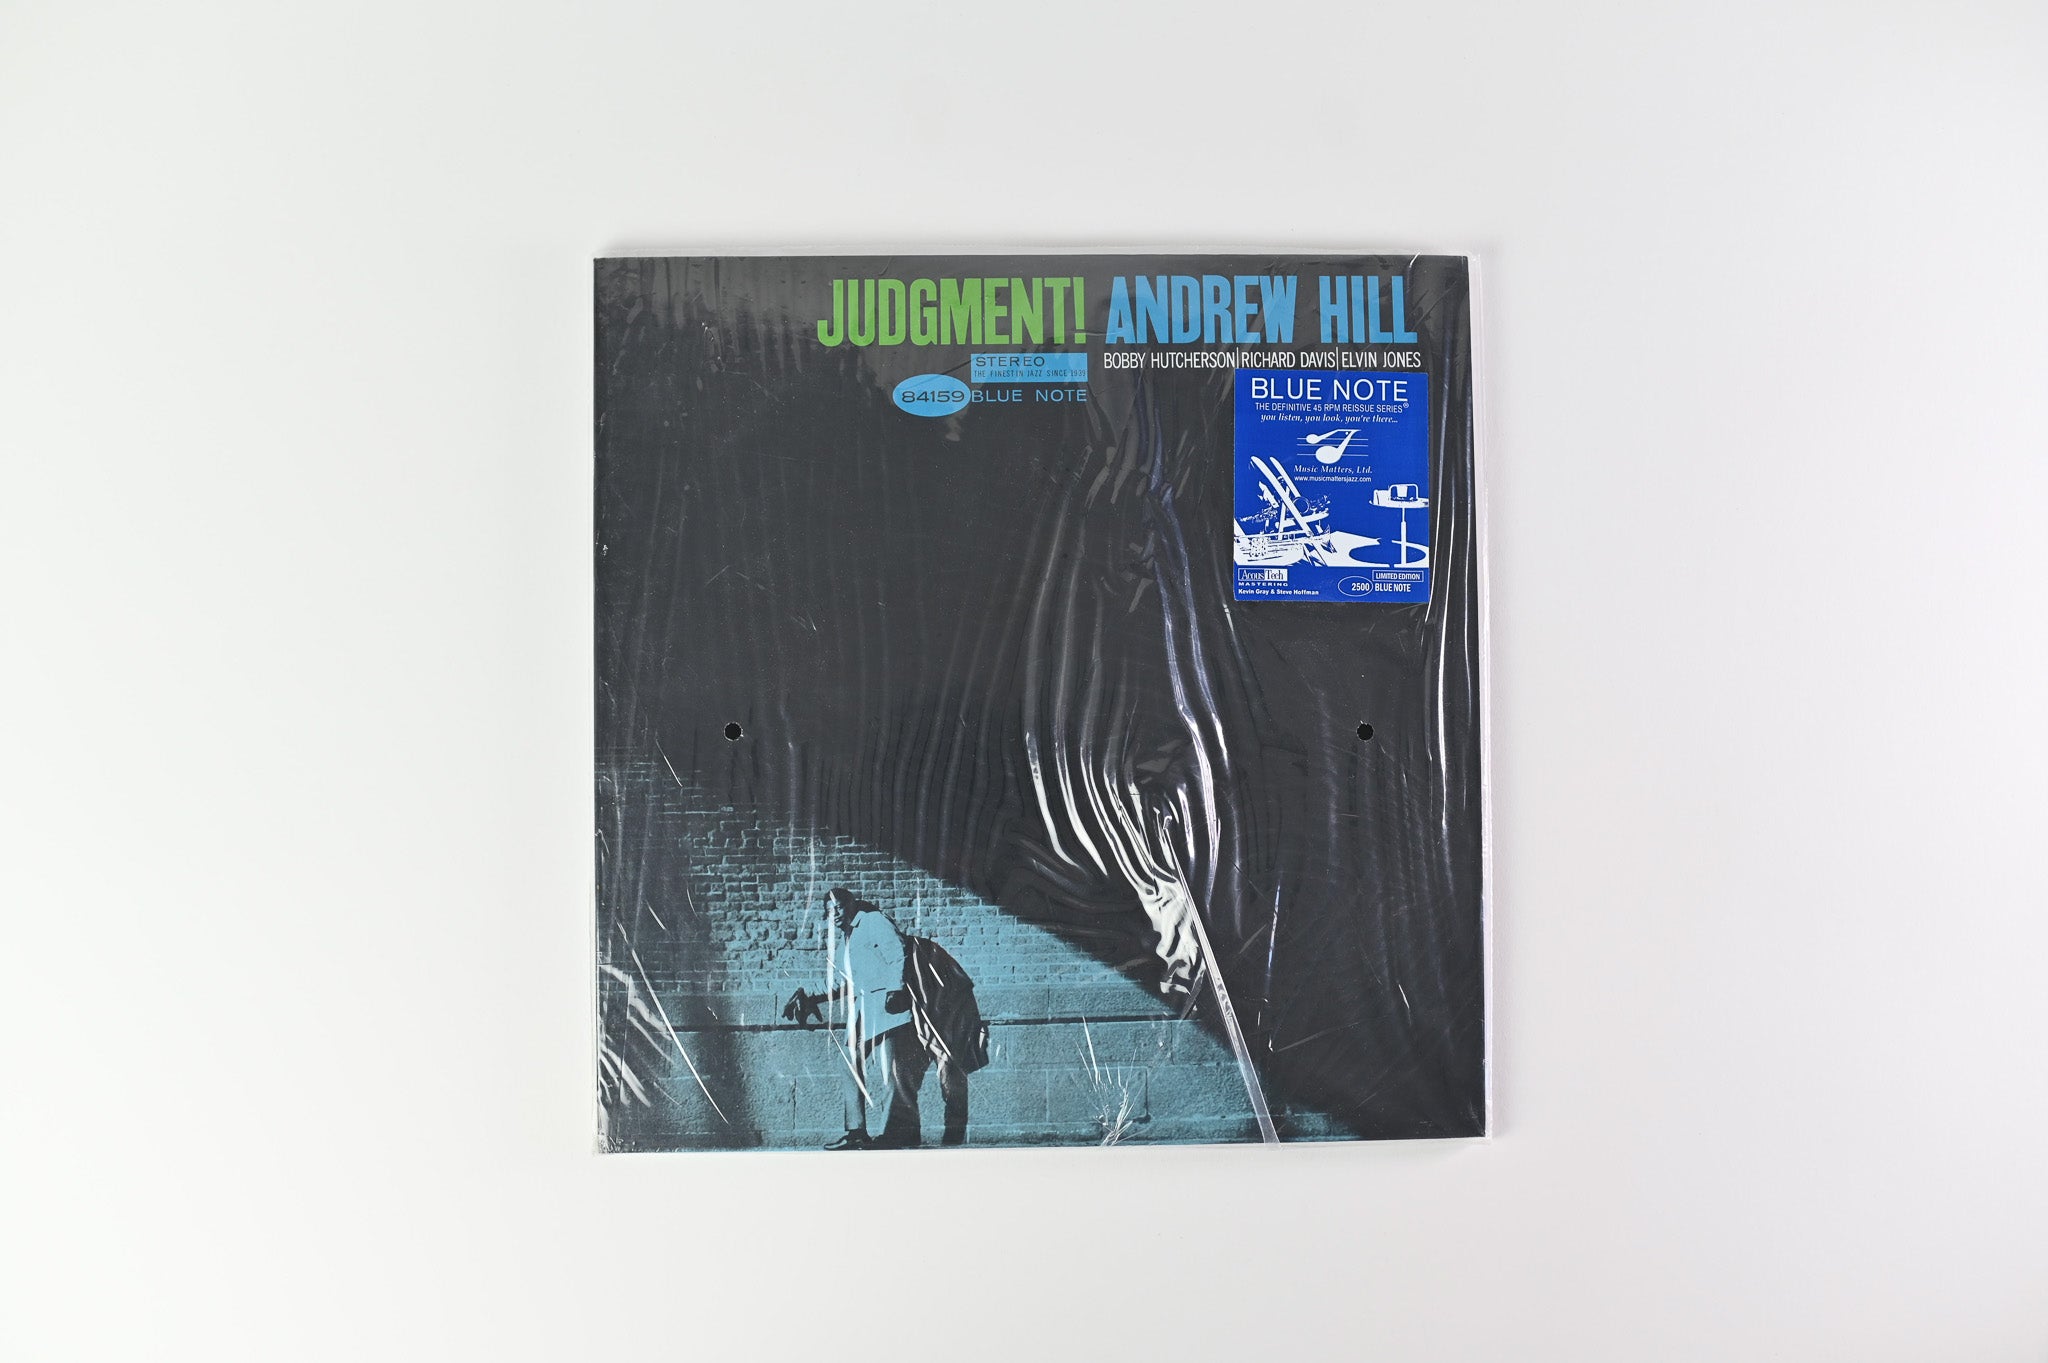 Andrew Hill - Judgment! on Blue Note Music Matters Ltd 45 RPM Reissue